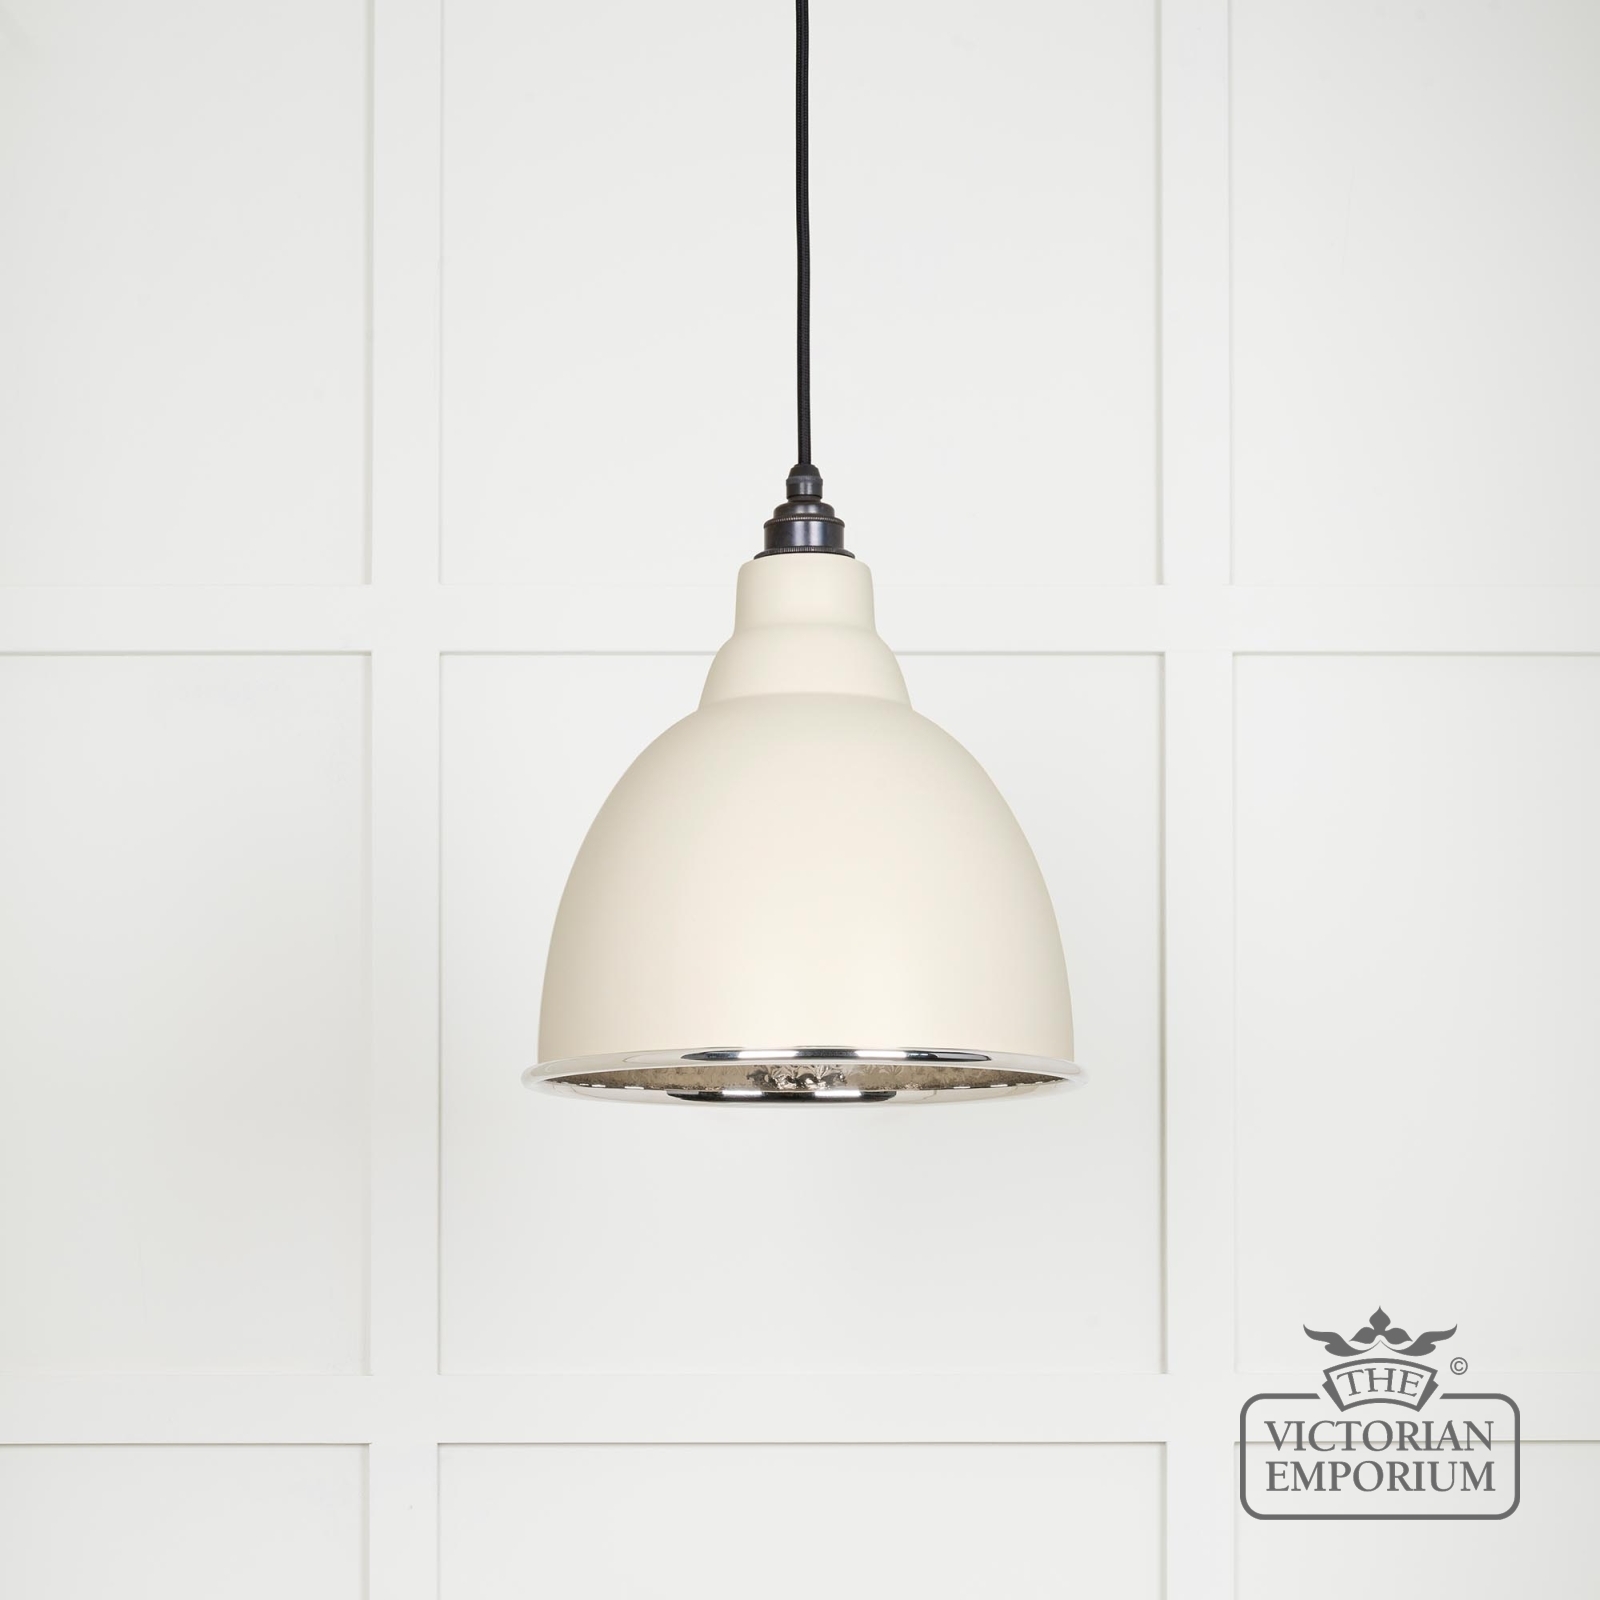 Brindle Pendant Light in Teasel with Hammered Nickel Interior